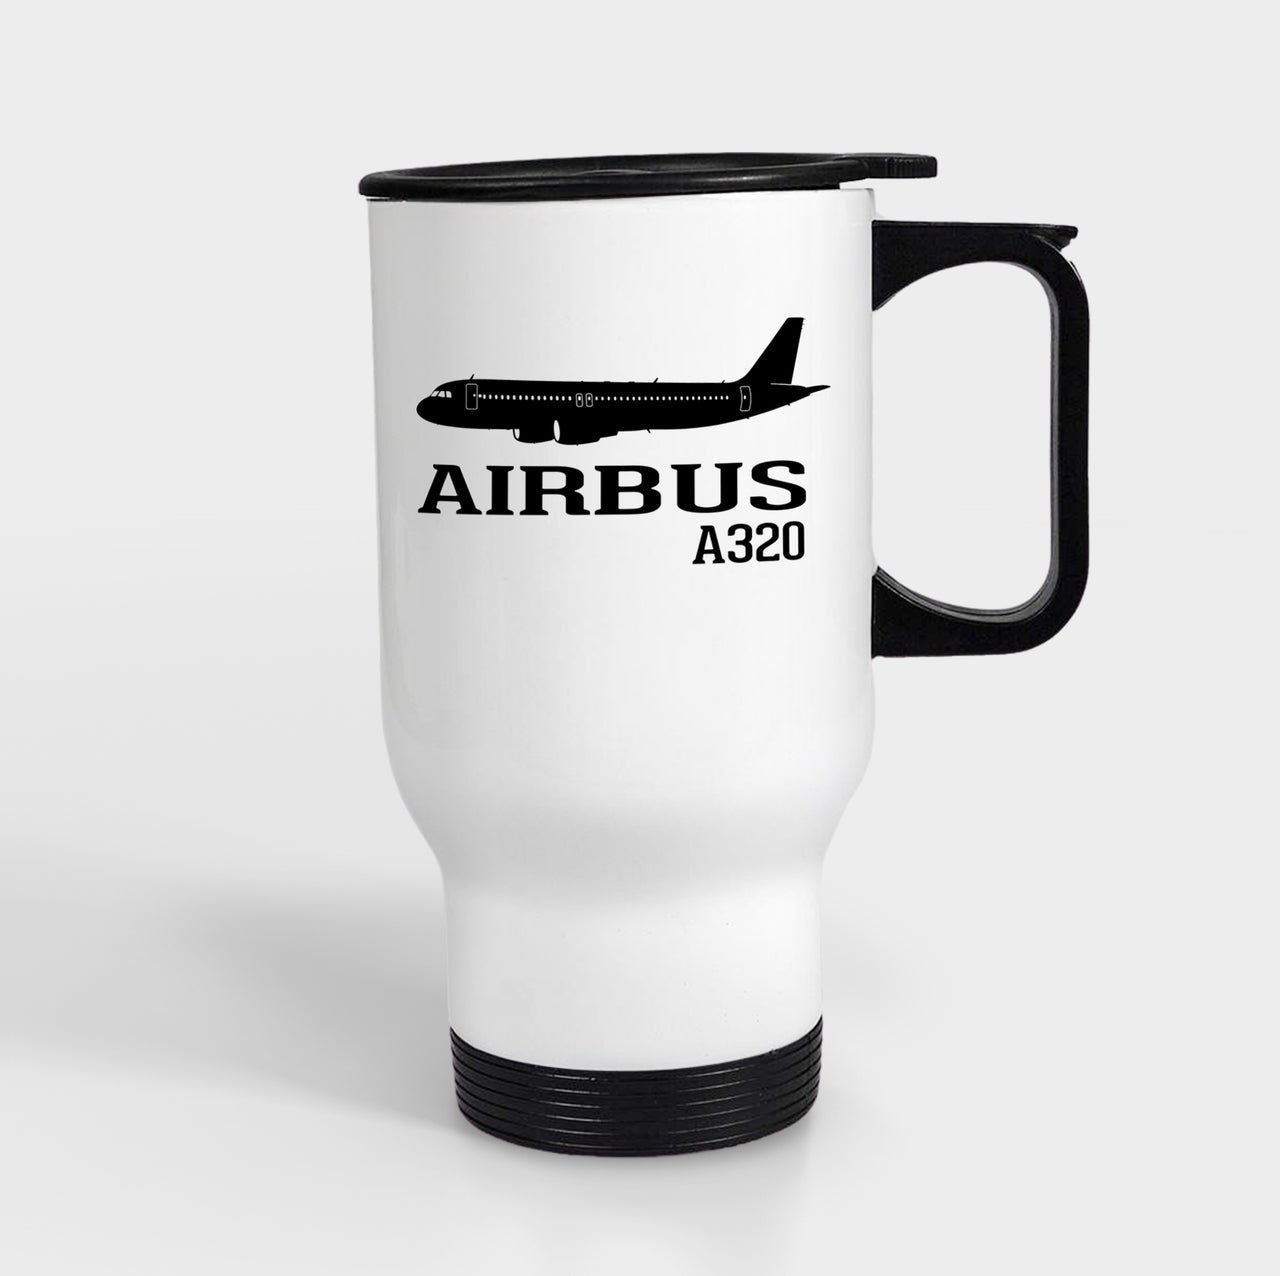 Airbus A320 Printed Designed Travel Mugs (With Holder)